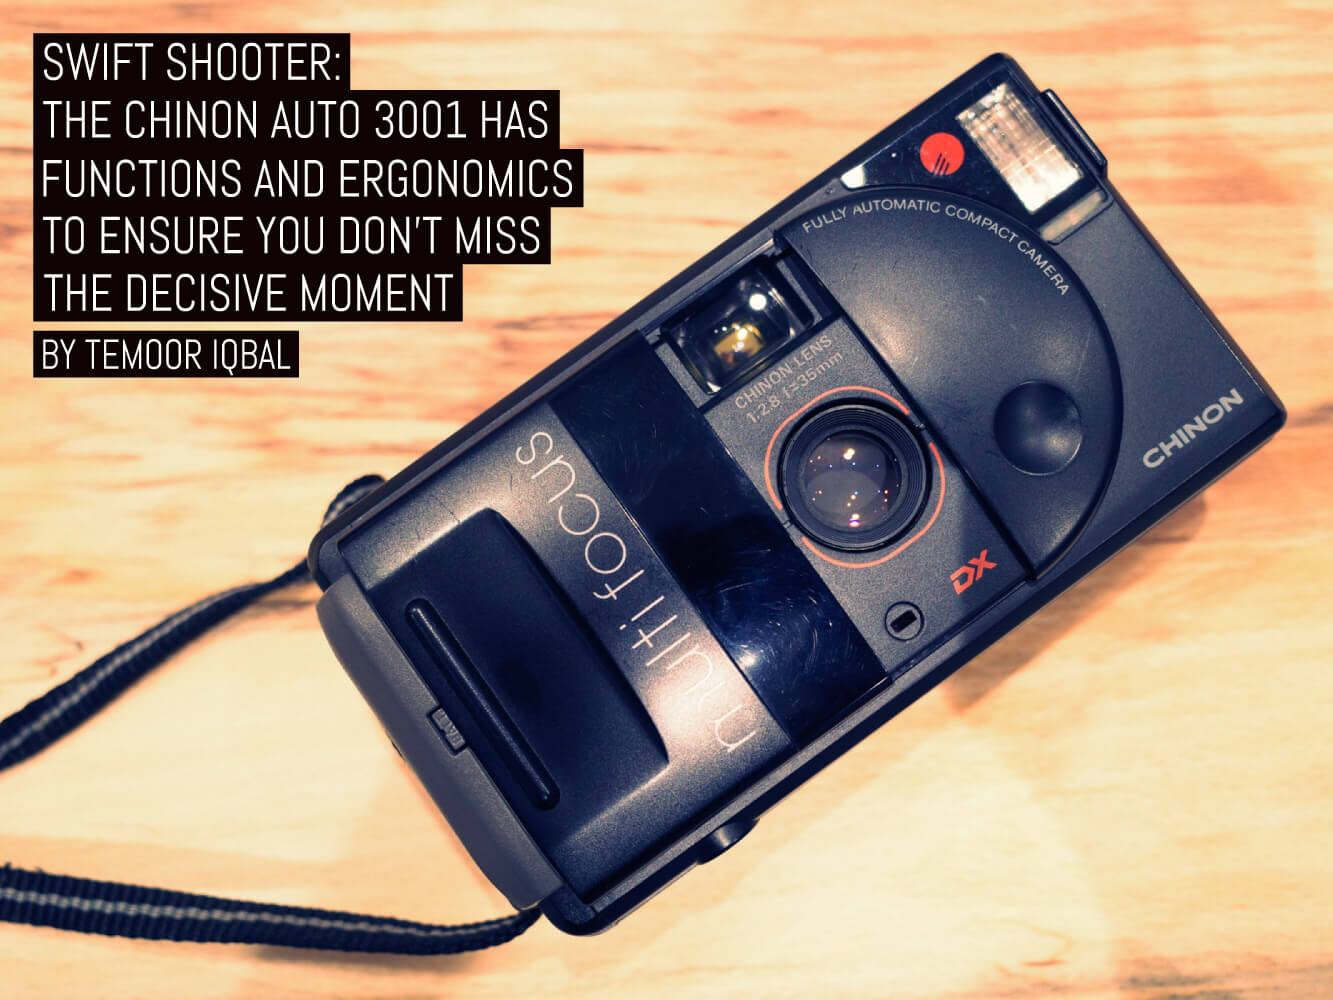 Swift shooter: The Chinon Auto 3001 has the functions and ergonomics to ensure you don’t miss the decisive moment